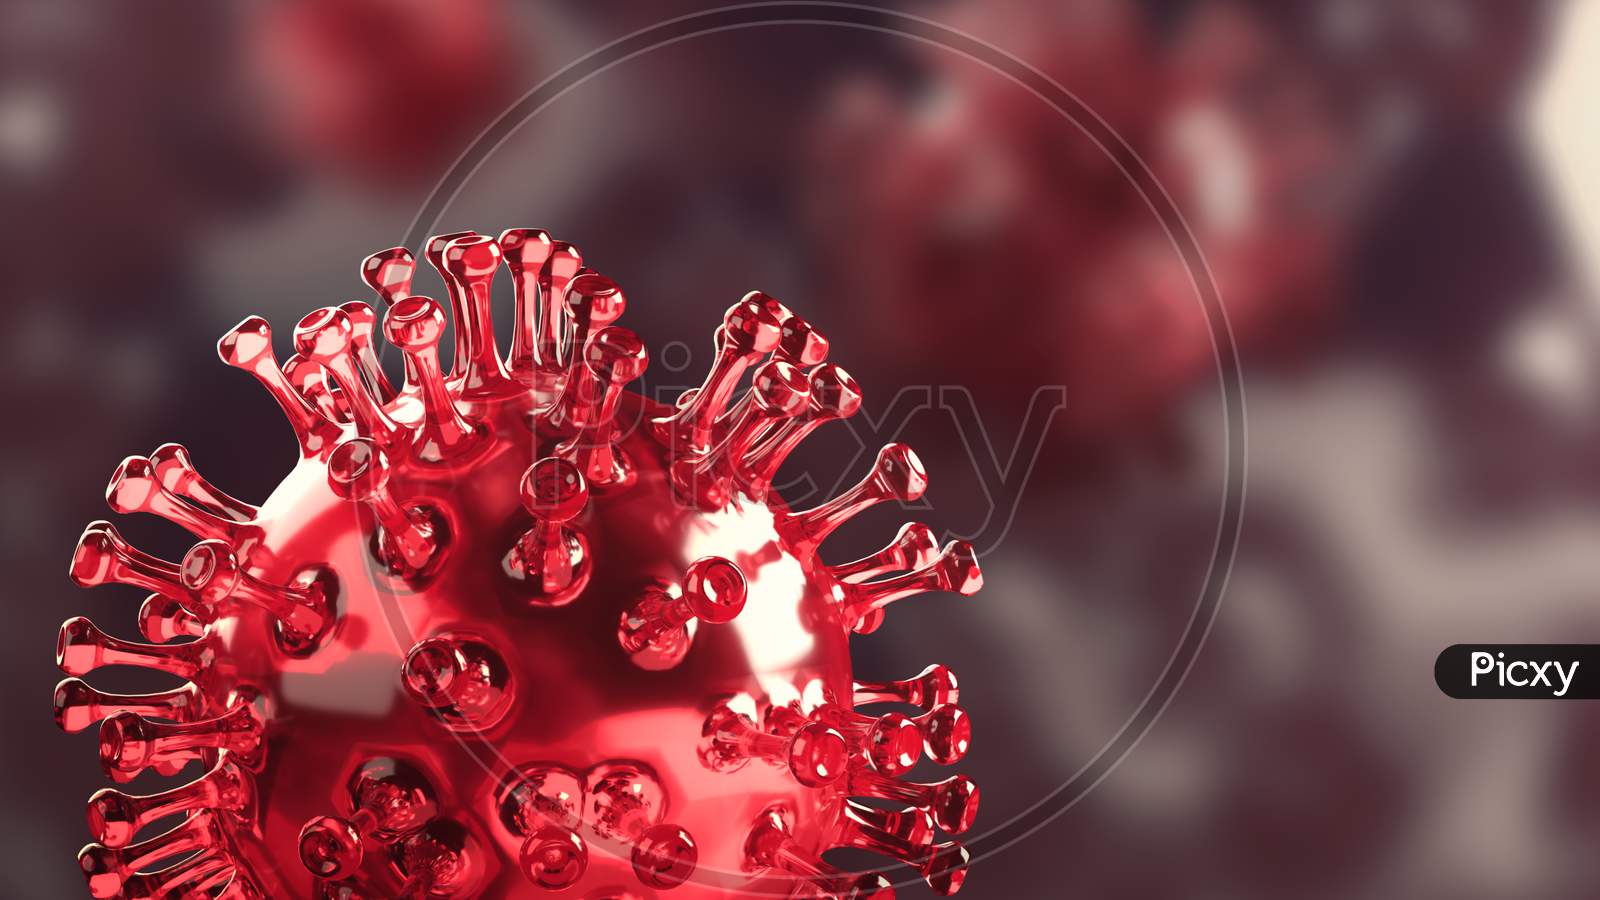 Closeup Coronavirus Covid-19 In Human Lung Body Background. Science Microbiology Concept. Purple Corona Virus Outbreak Epidemic. Medical Health Virology Infection Research. 3D Illustration Rendering